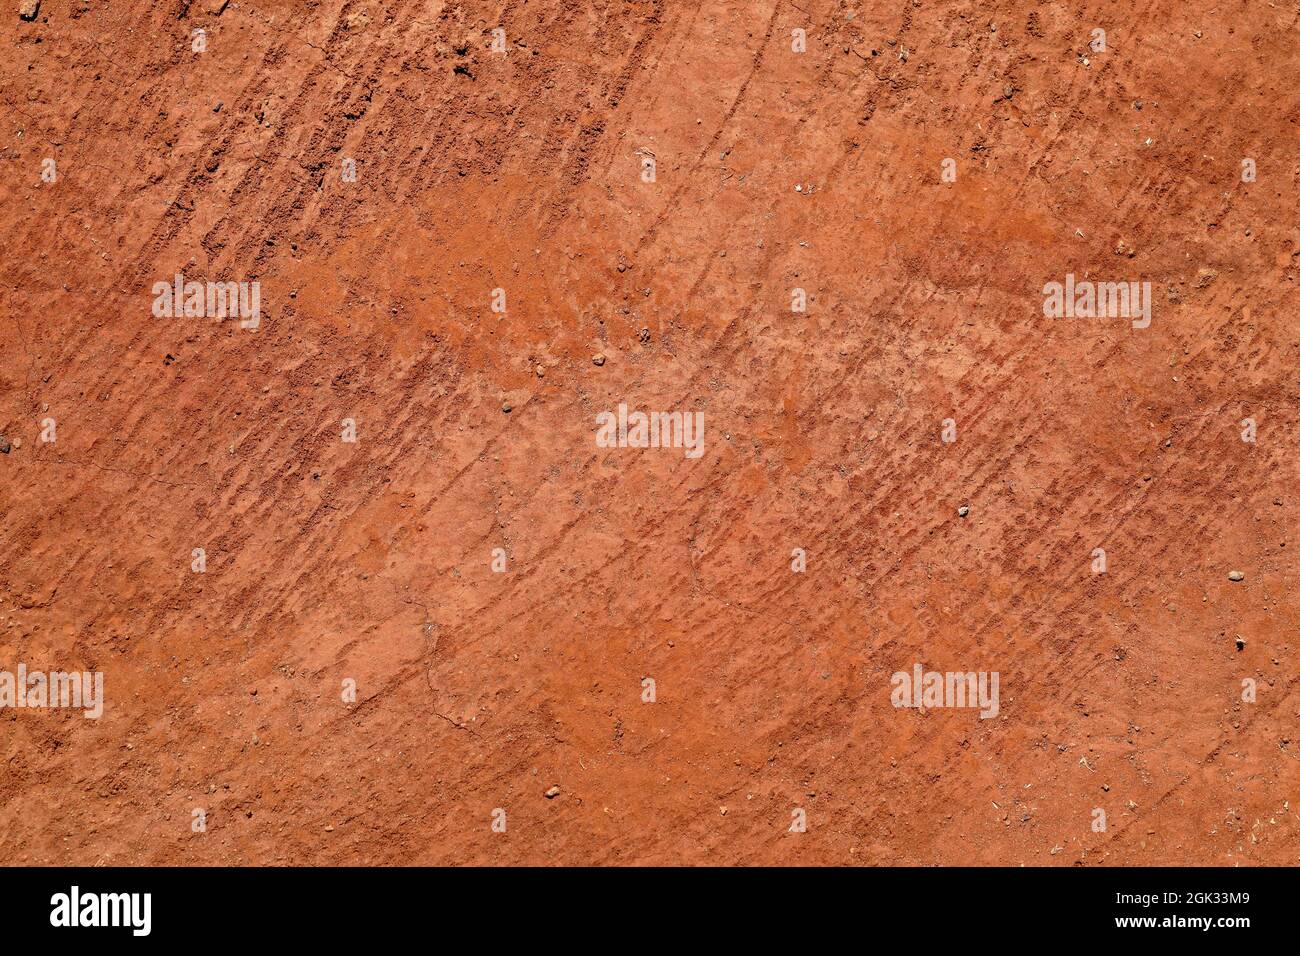 Abstract natural background from texture of orange red terracota clay soil Stock Photo